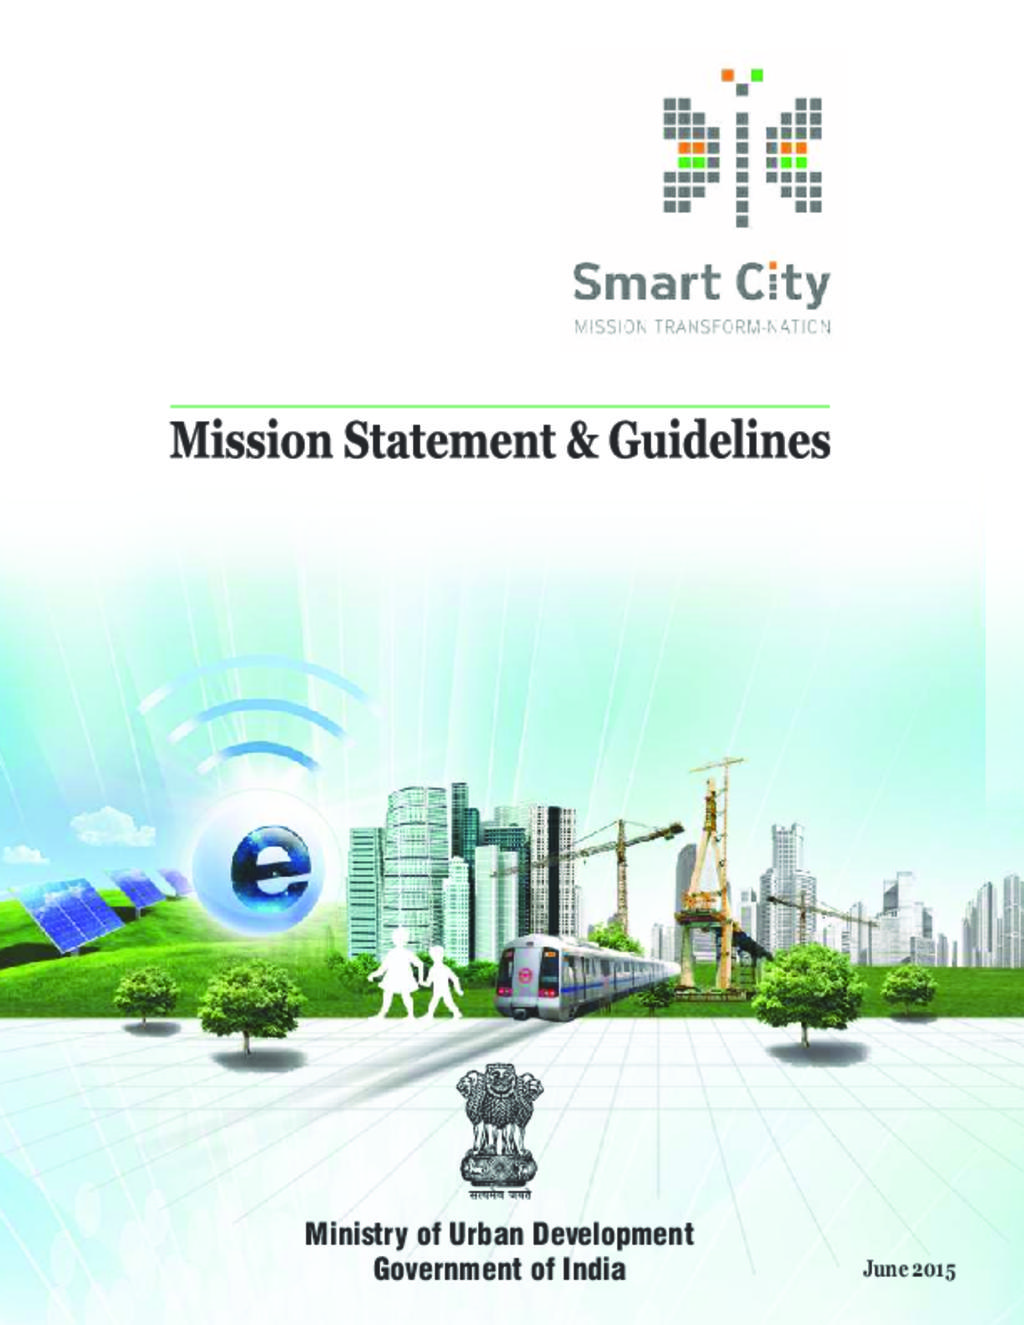 Smart City Mission Statement and Guidelines